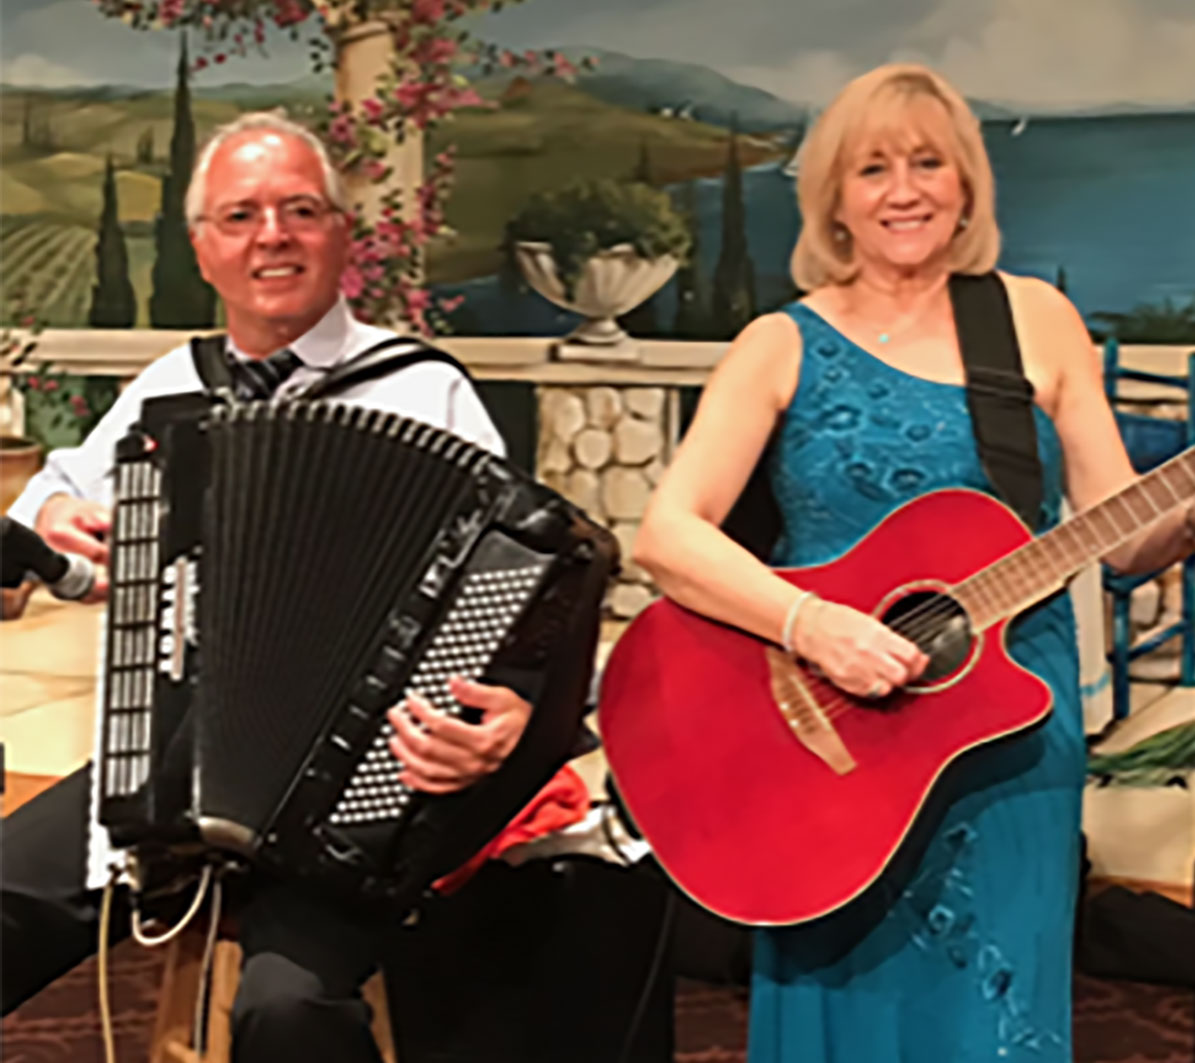 Irish Music with Sharon and Mike at Tim Finnegans